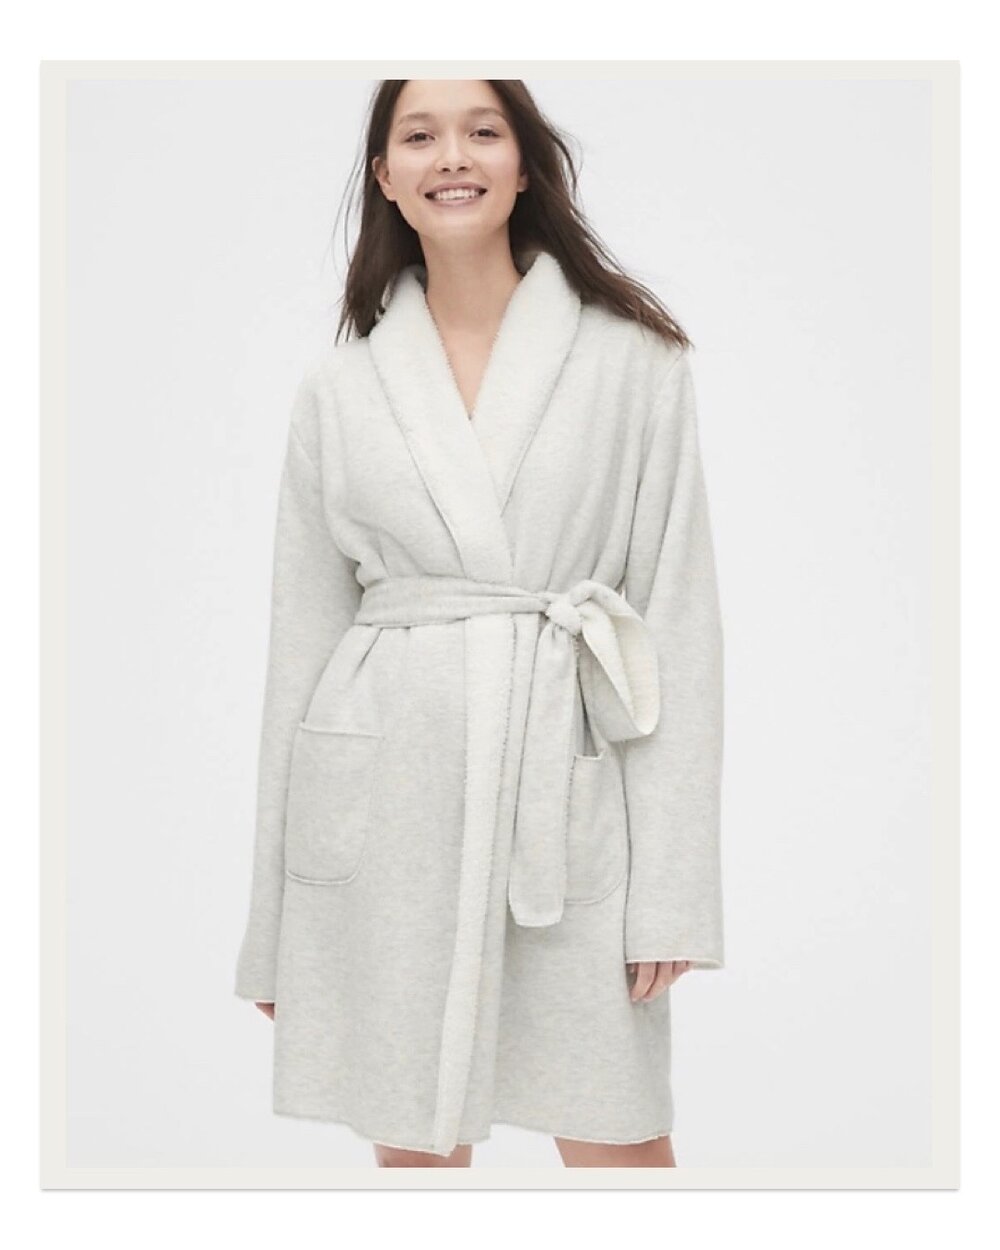 Is there anything cozier than a fluffy robe? This sherpa lined fleece robe from the Gap is so comfy to wear around the house, and it’s not too bulky so you still feel chic in it. Throwing this on after a bath will make you feel so sophisticated!